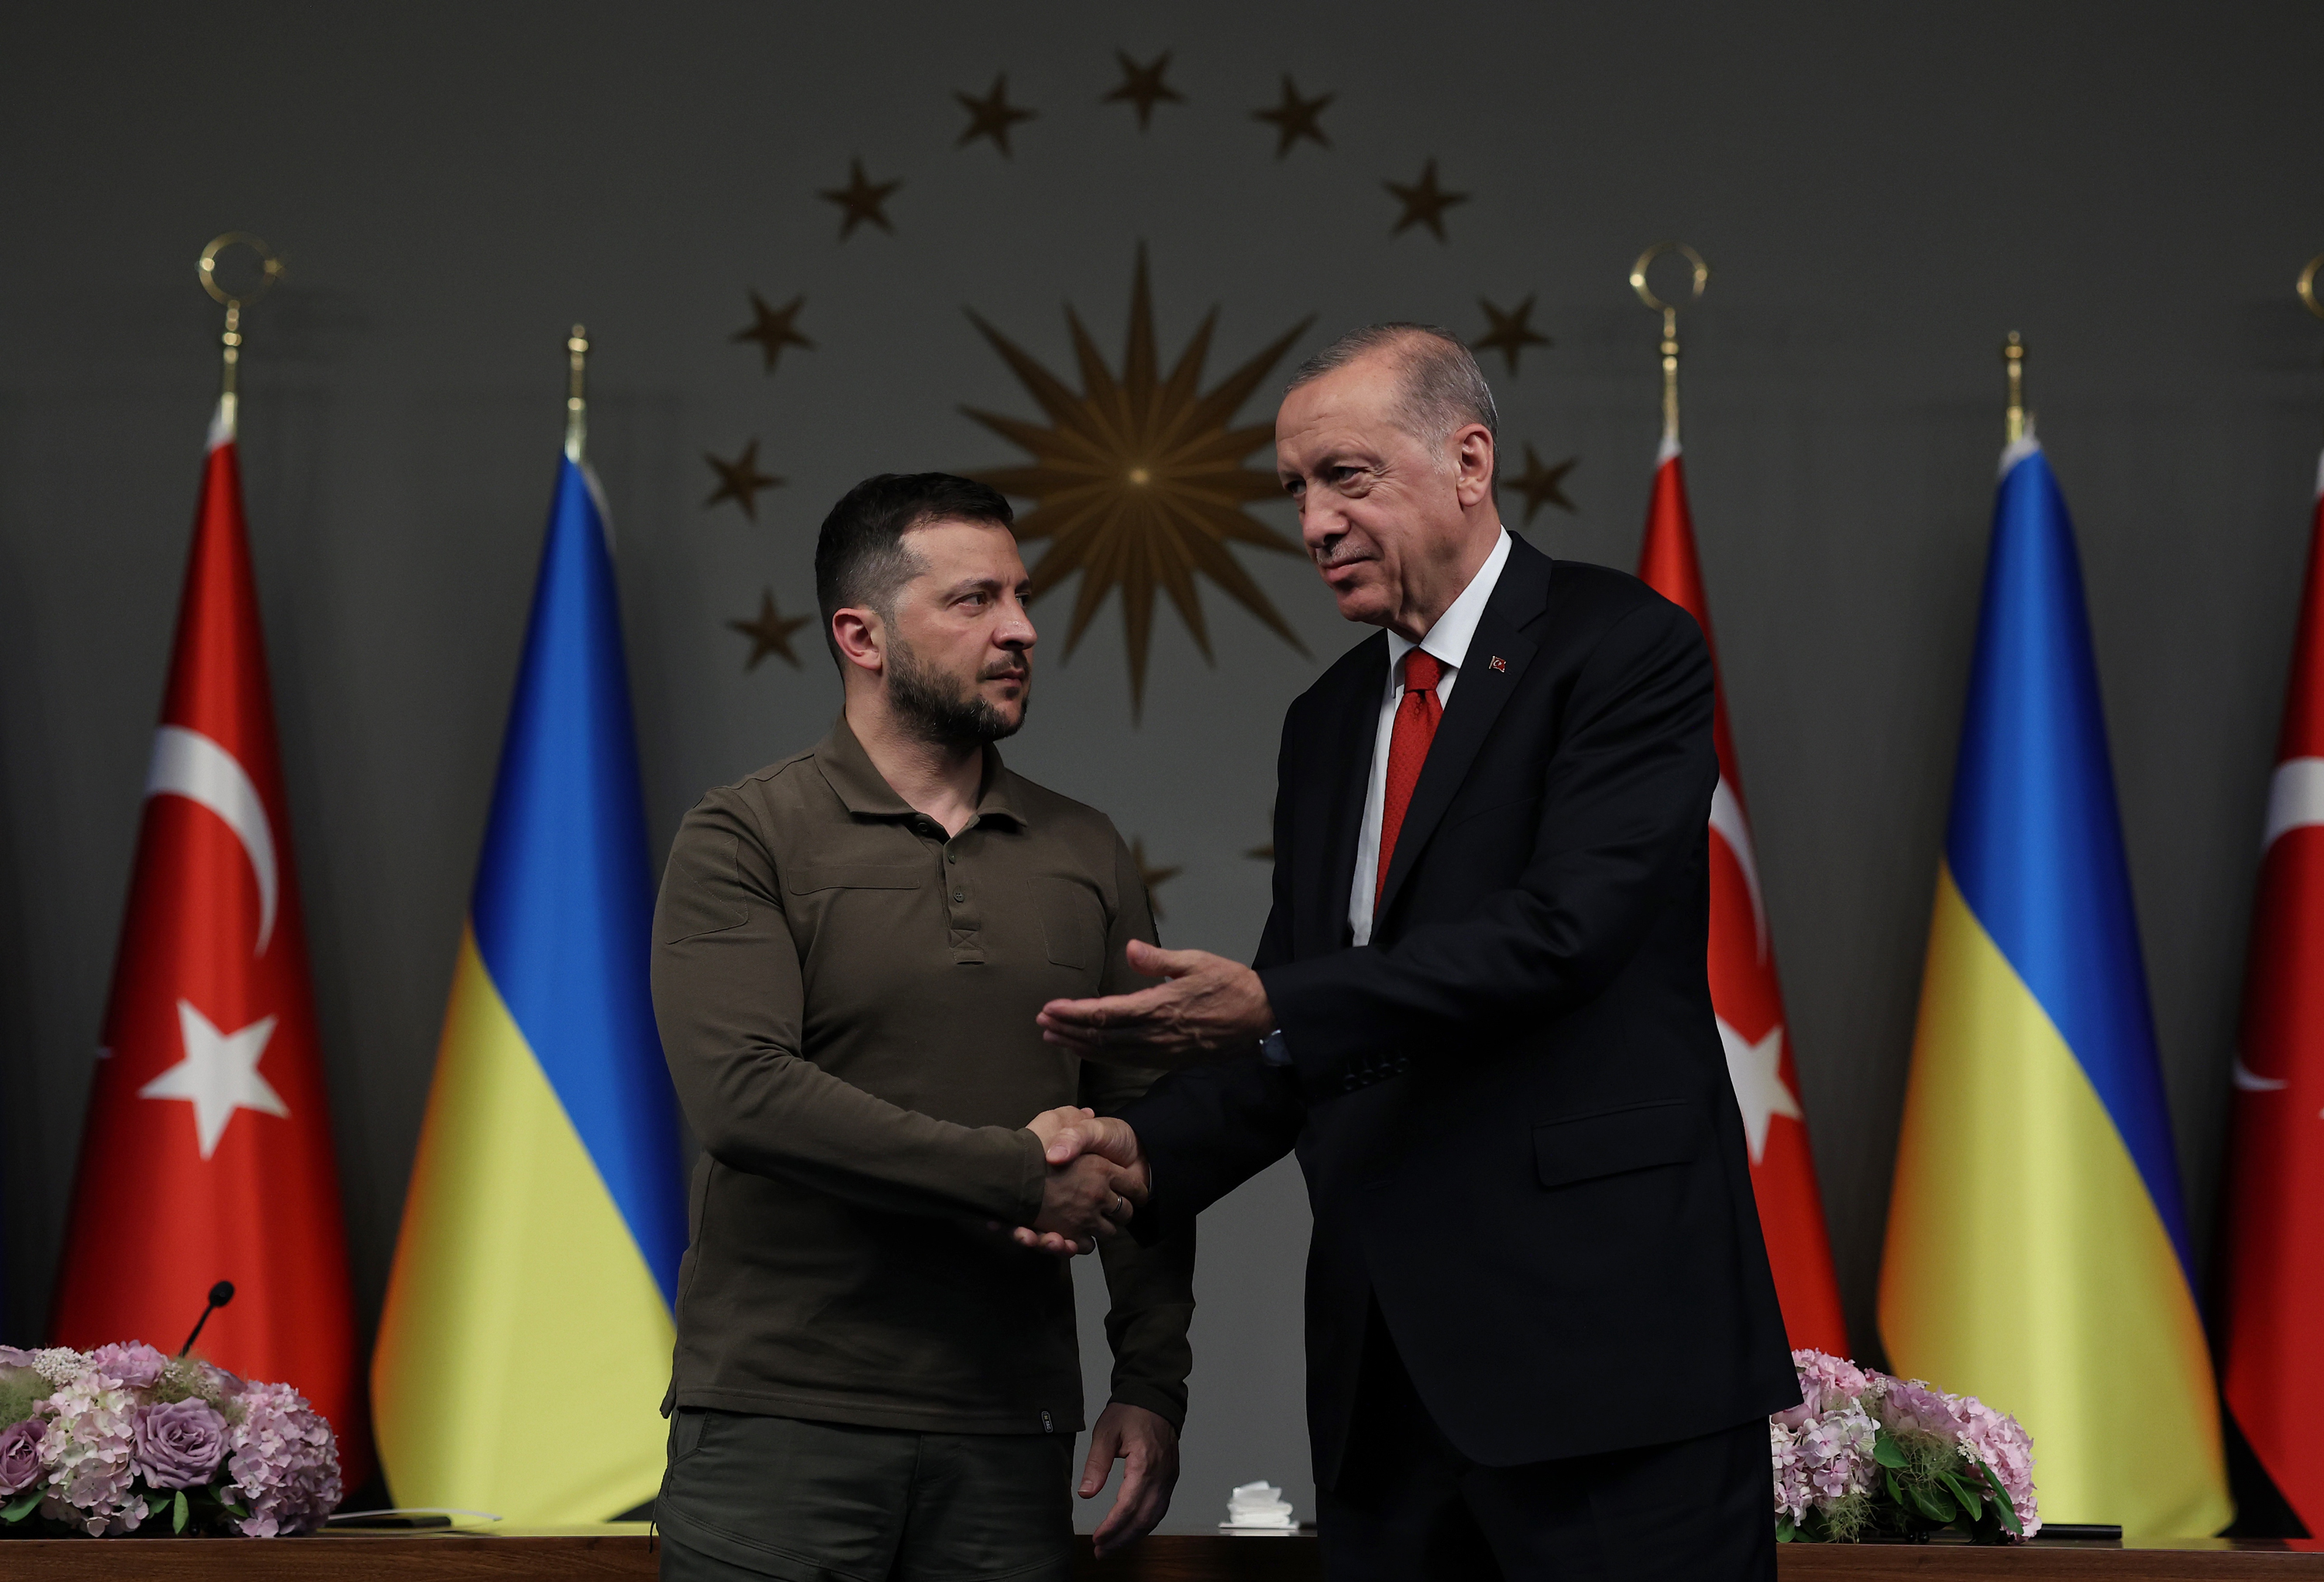 Turkish President Recep Tayyip Erdoğan and Ukrainian President Volodymyr Zelensky attend a joint press conference at the Vahdettin Mansion on July 8, in Istanbul, Turkey.